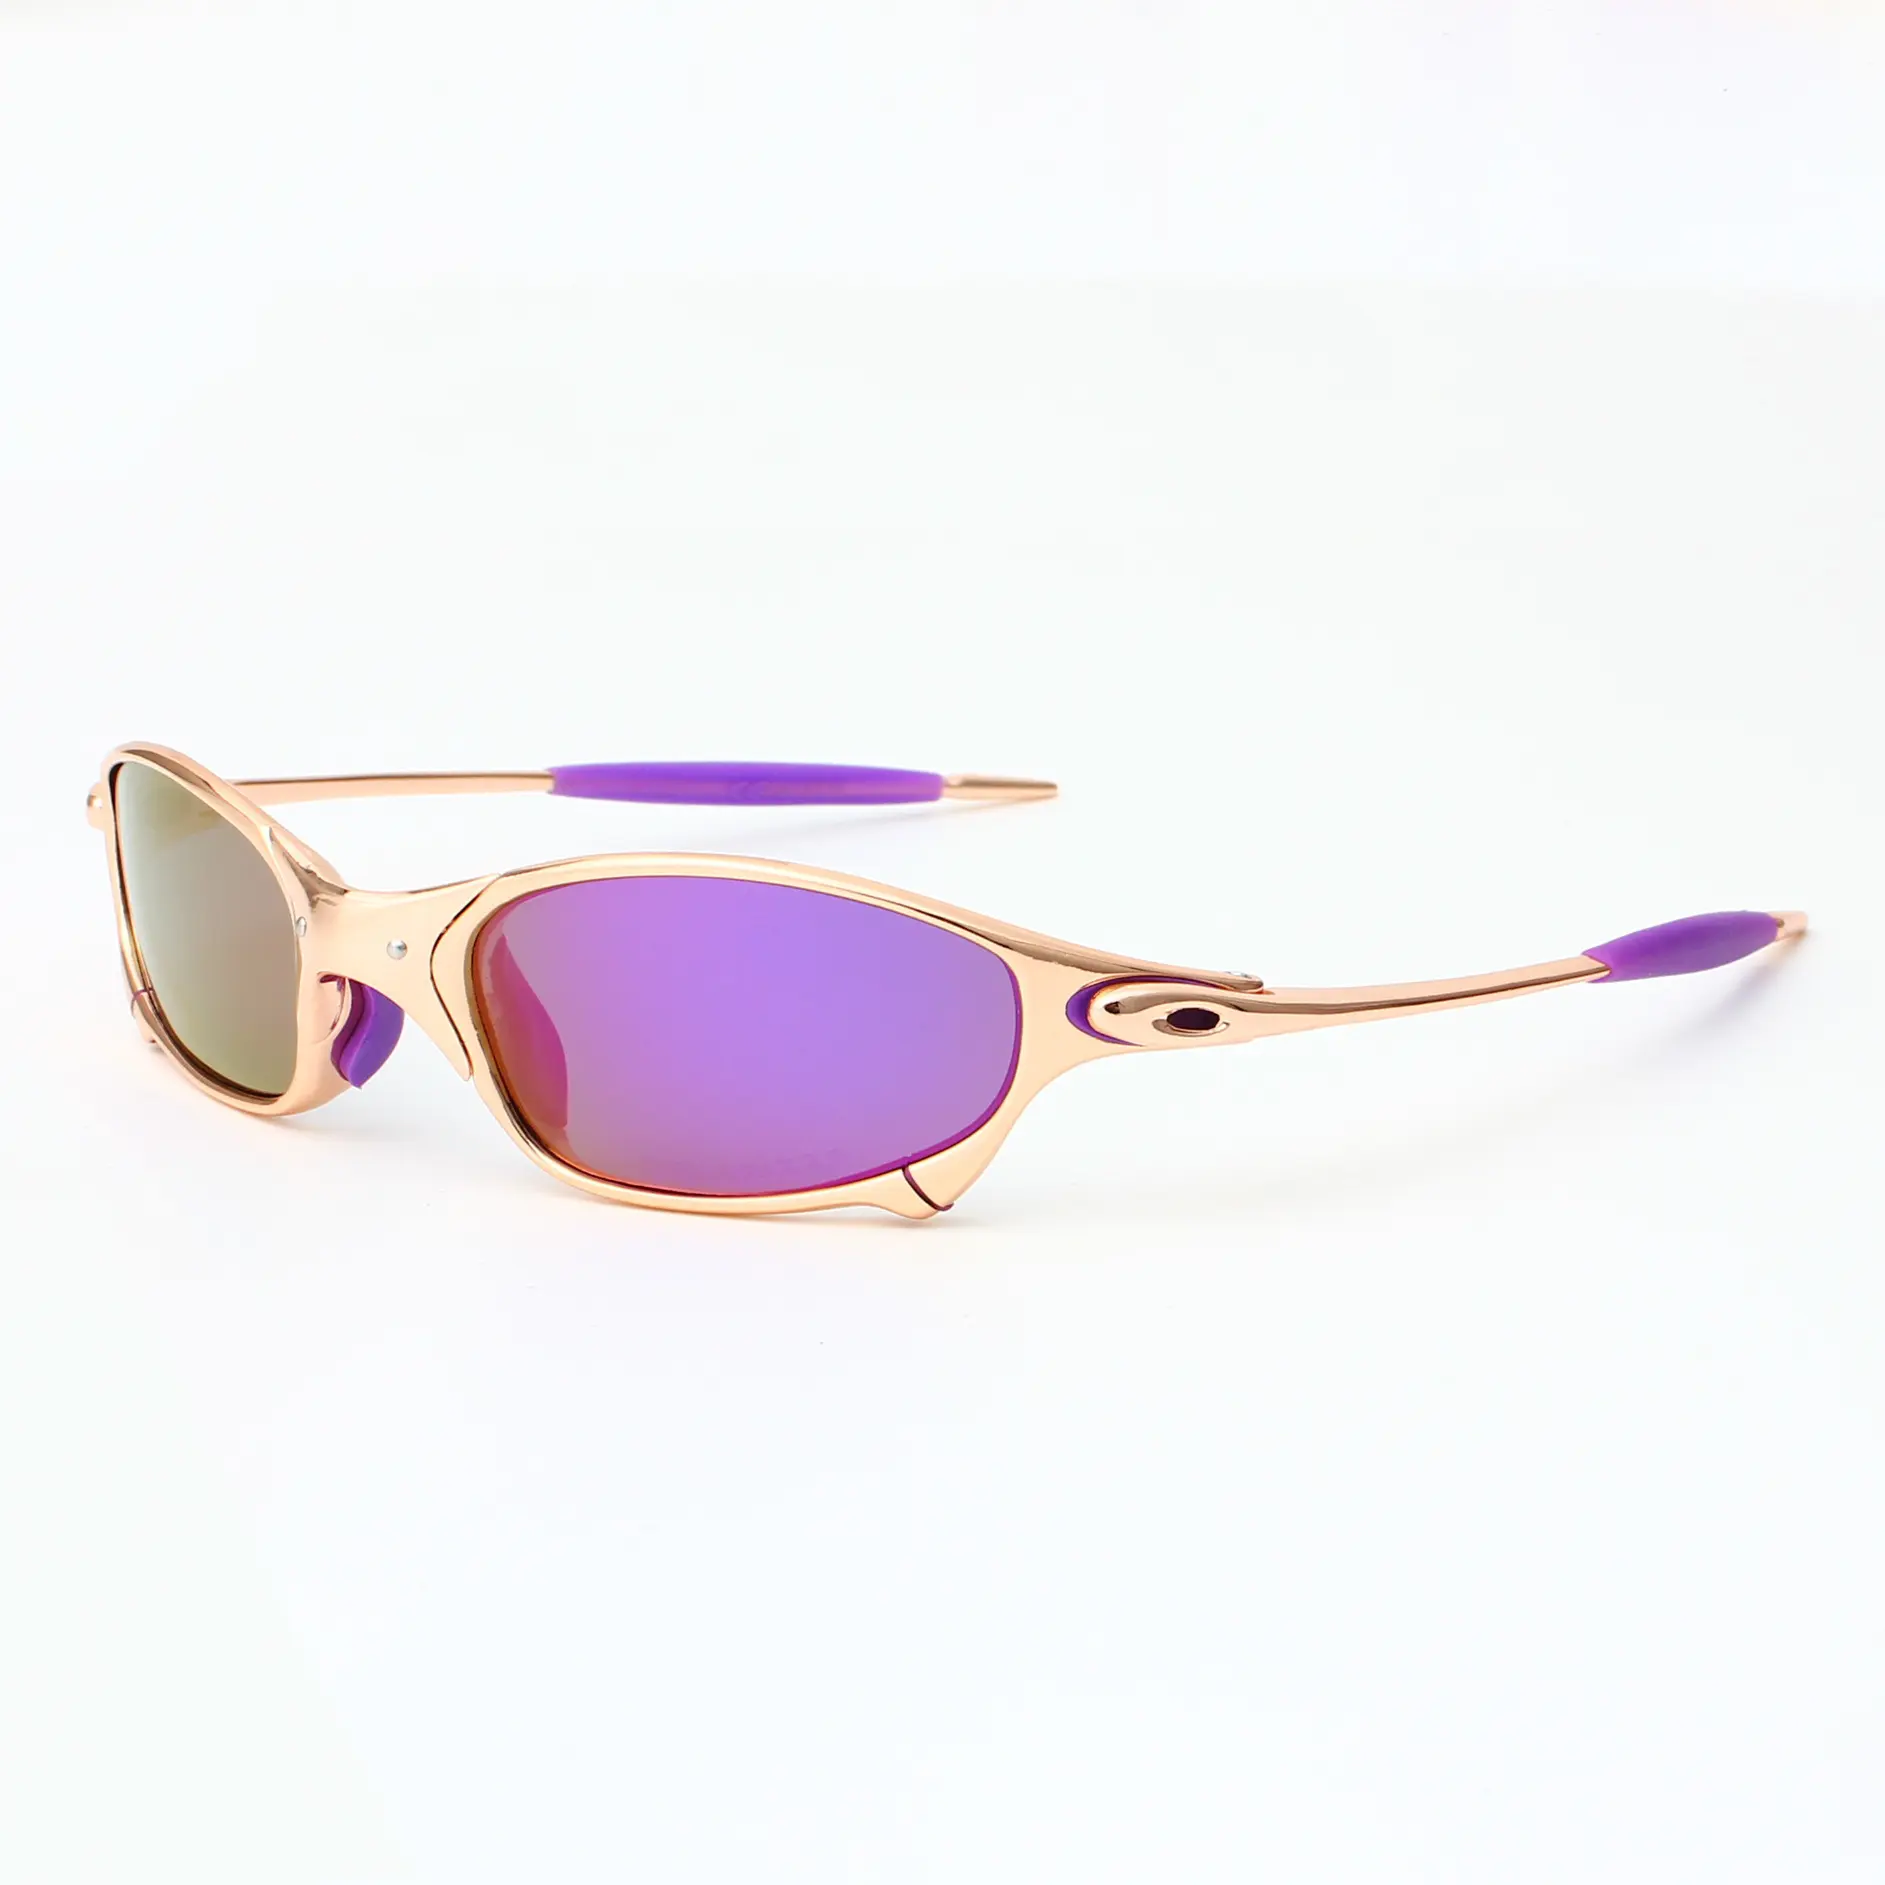 Fashion Trendy Polarized X Sports Sunglasses For Men And Women Gold Frame Colorful Outdoor Travel Riding Driving Sun Glasses